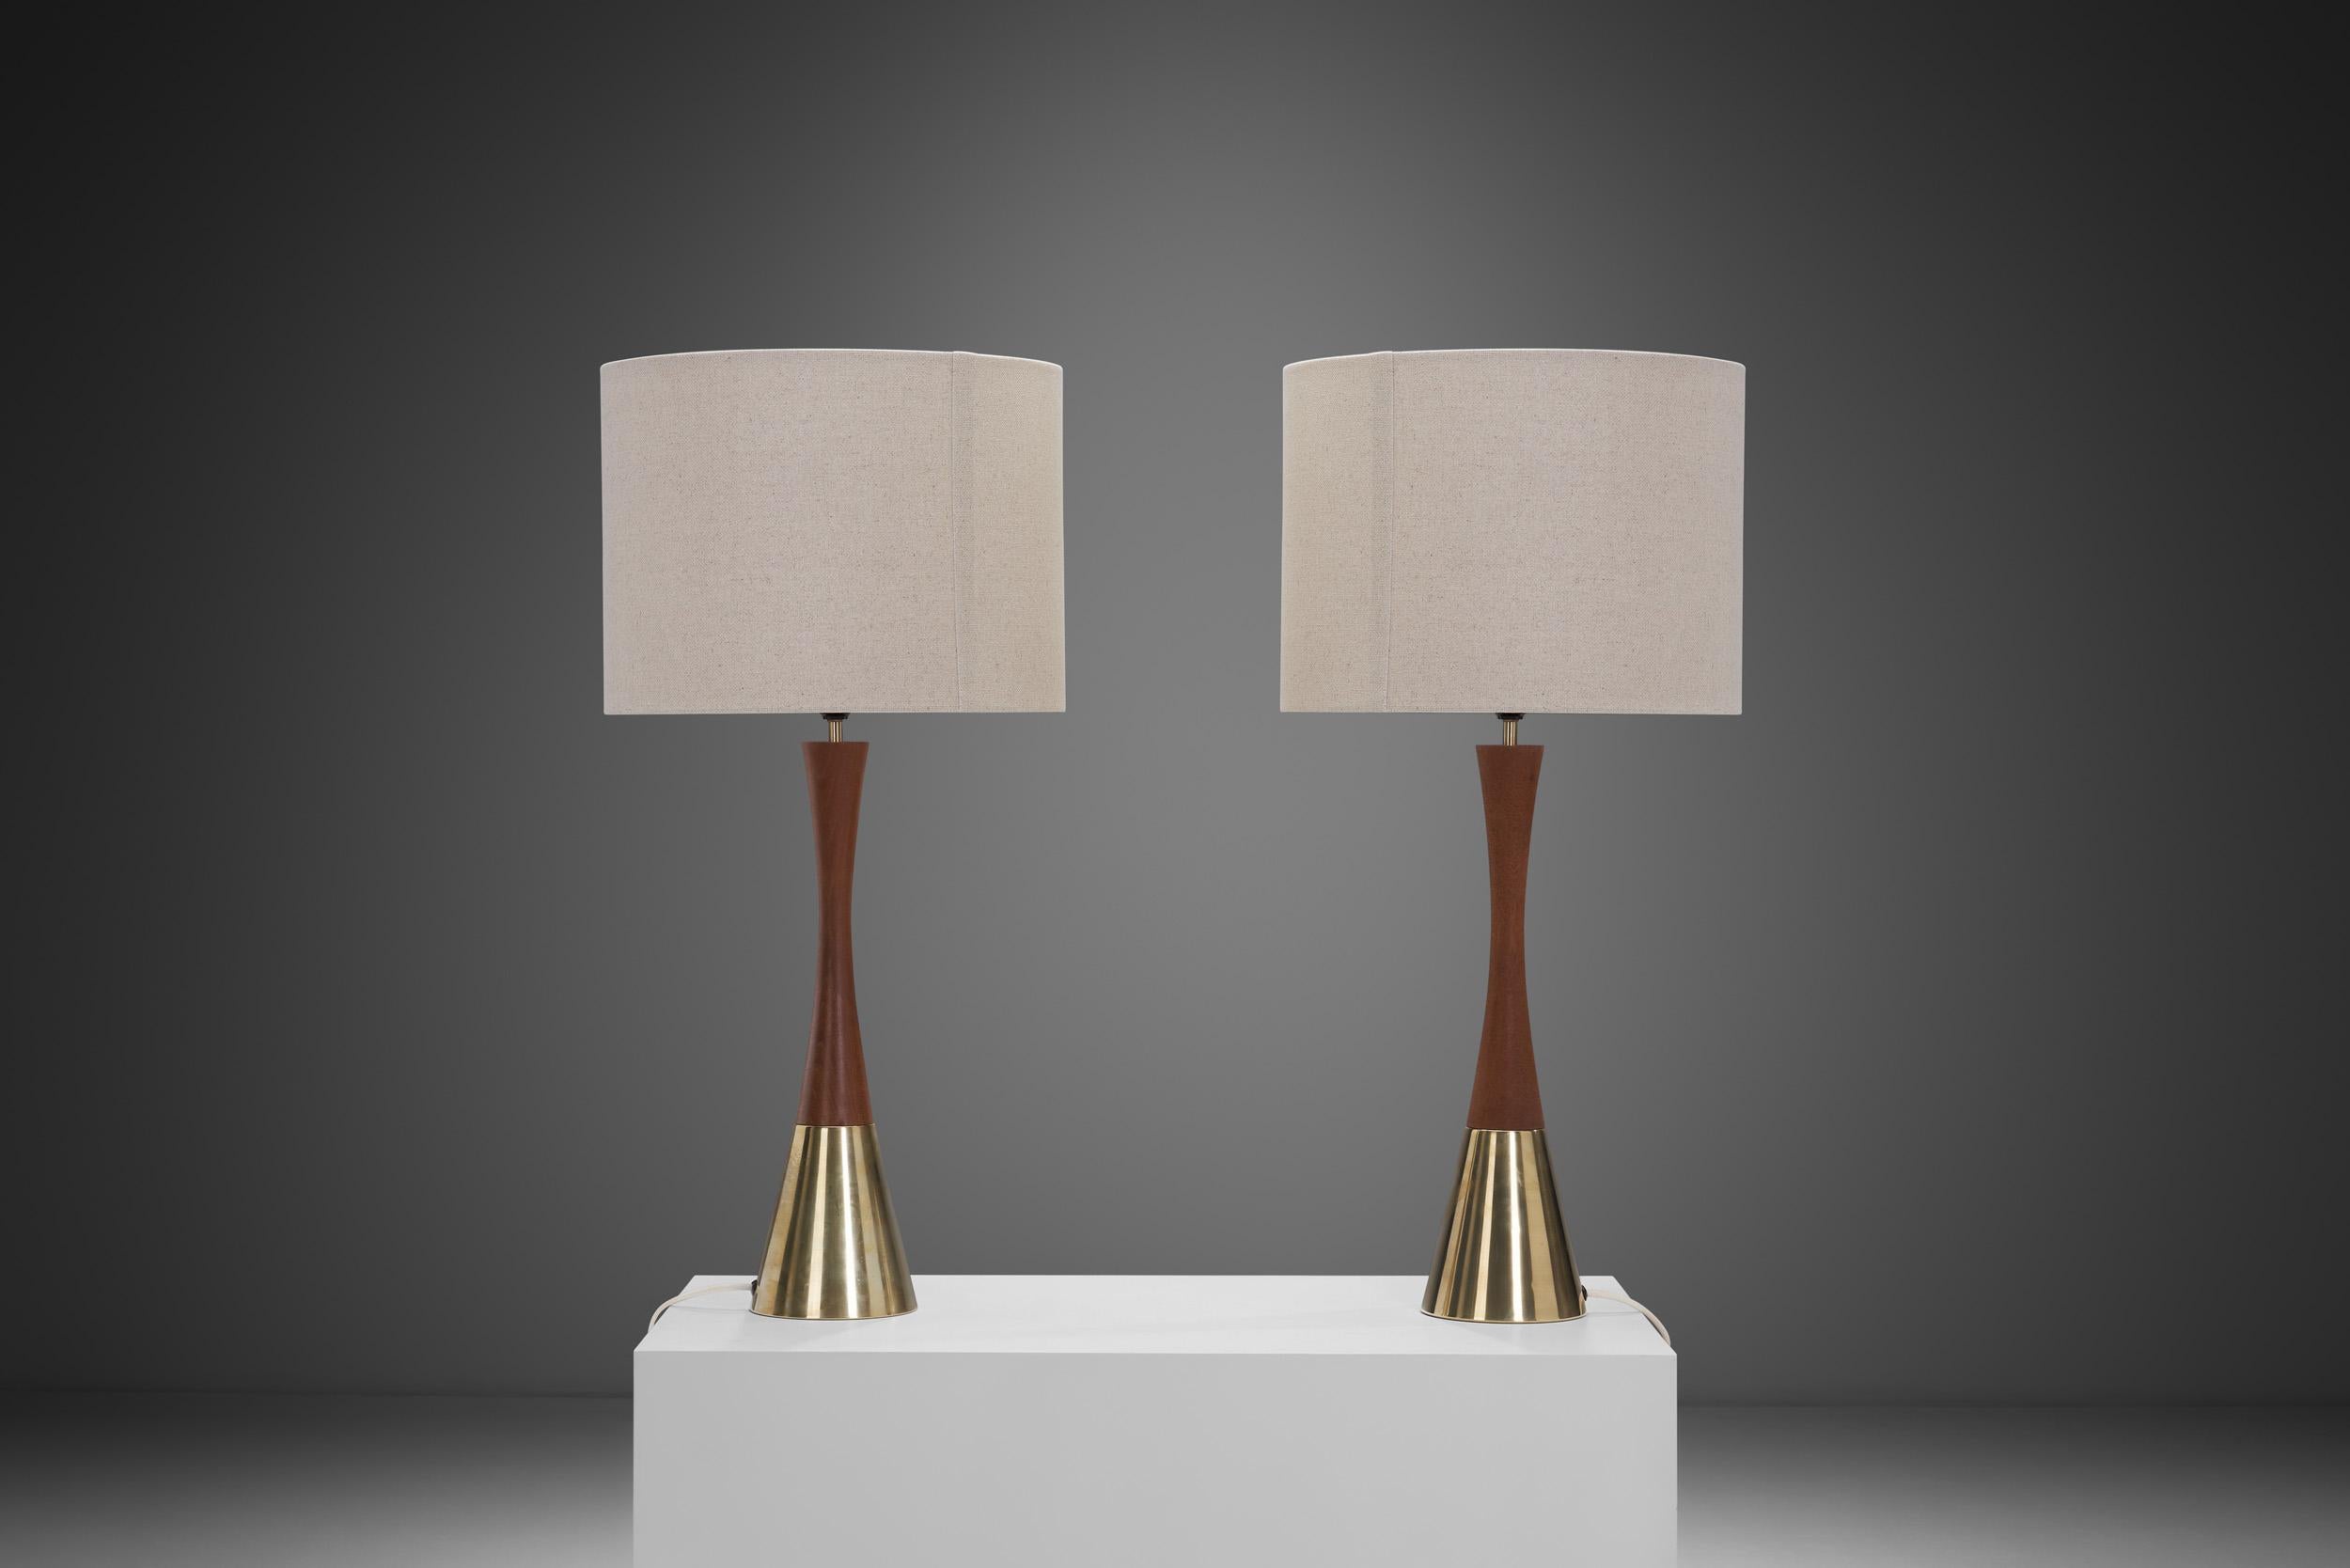 Pair of Teak and Brass Table Lamps by Bergboms, Sweden ca 1970s In Good Condition For Sale In Utrecht, NL